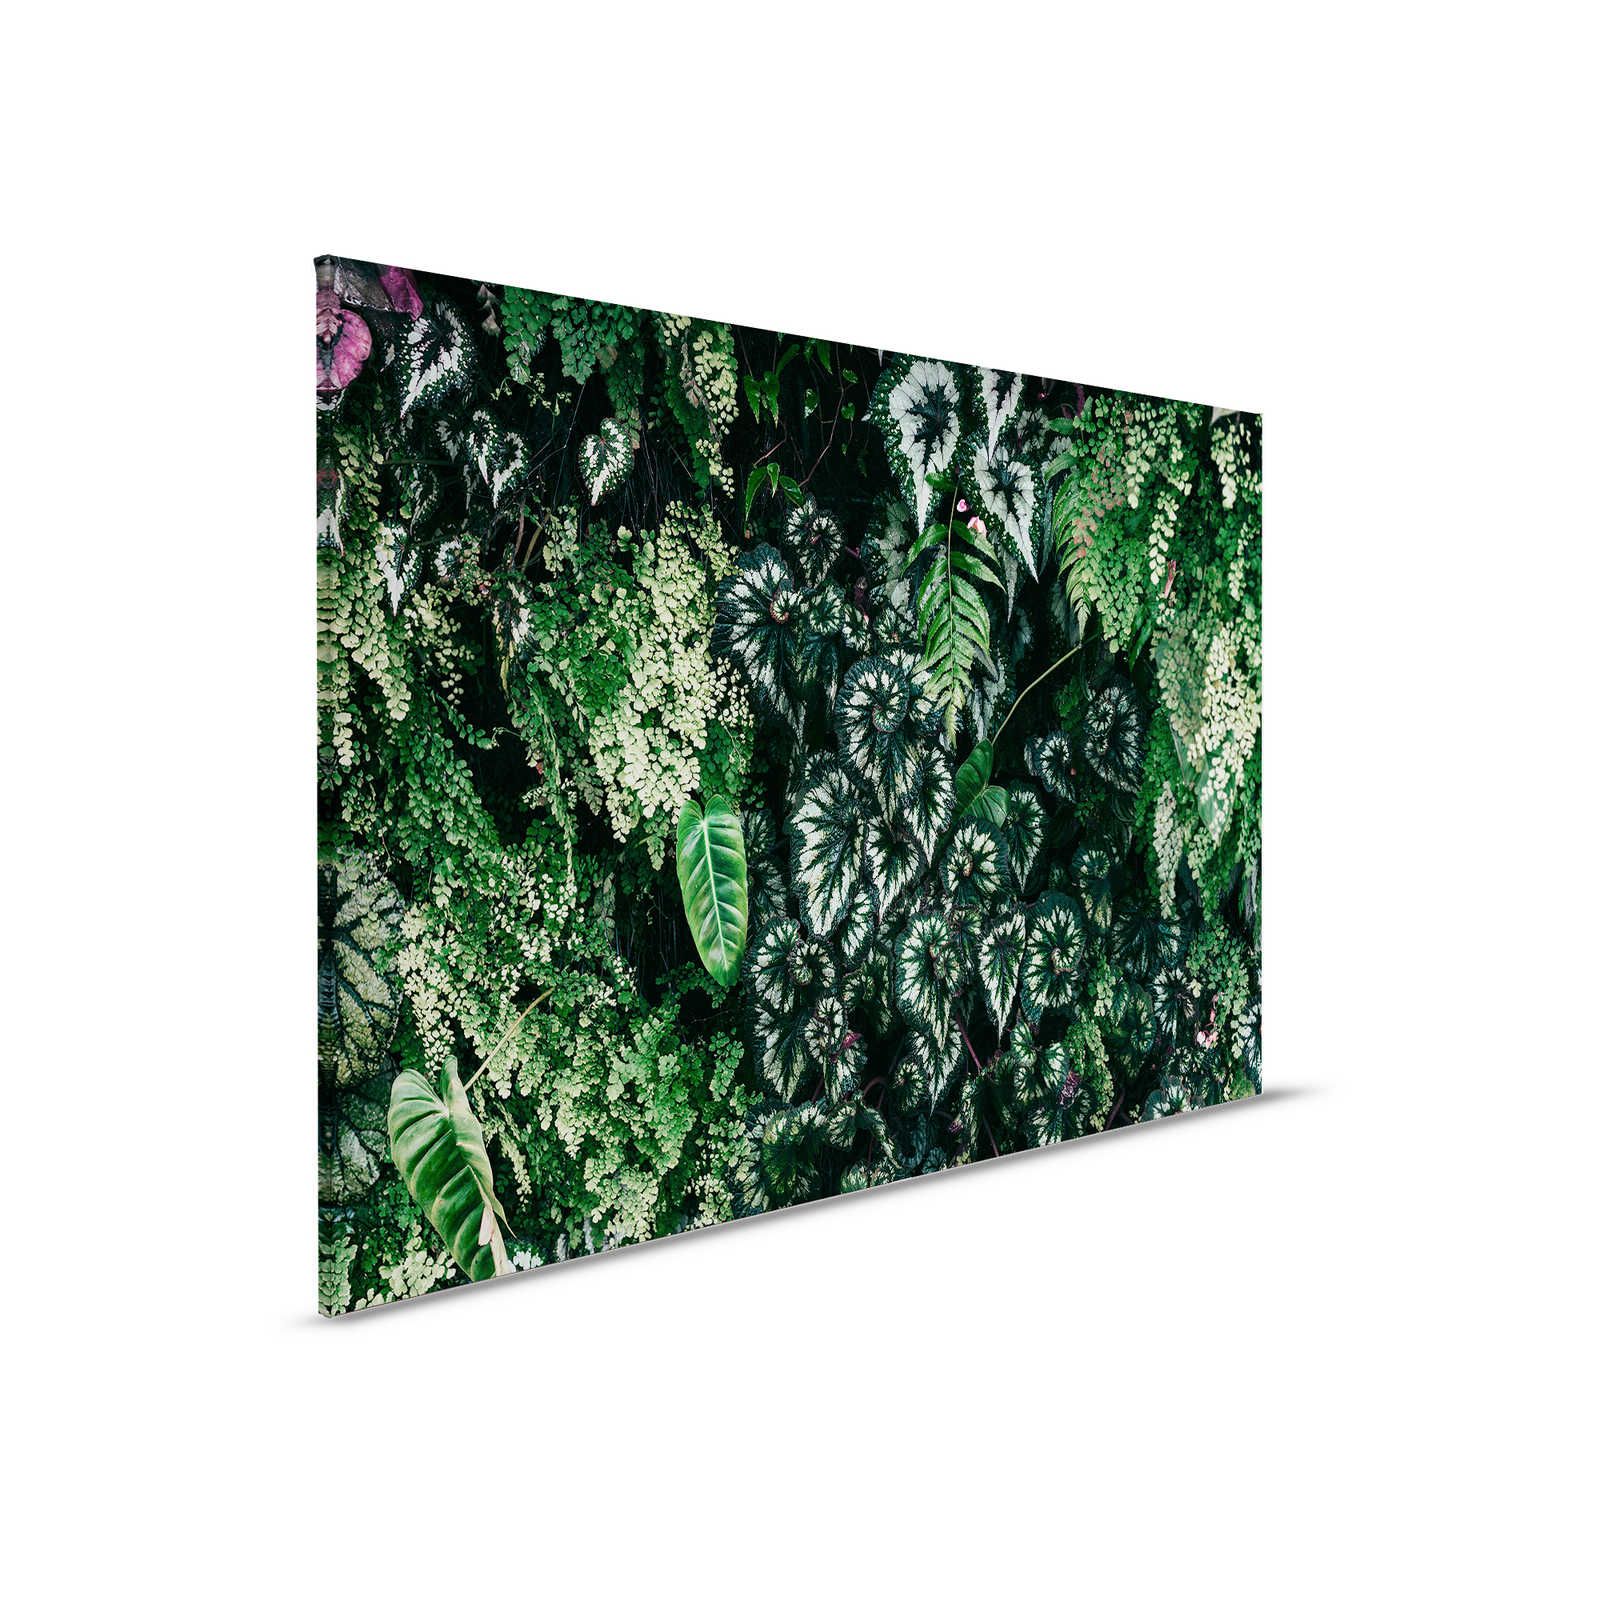 Deep Green 2 - Canvas painting Foliage thicket, ferns & hanging plants - 0.90 m x 0.60 m
